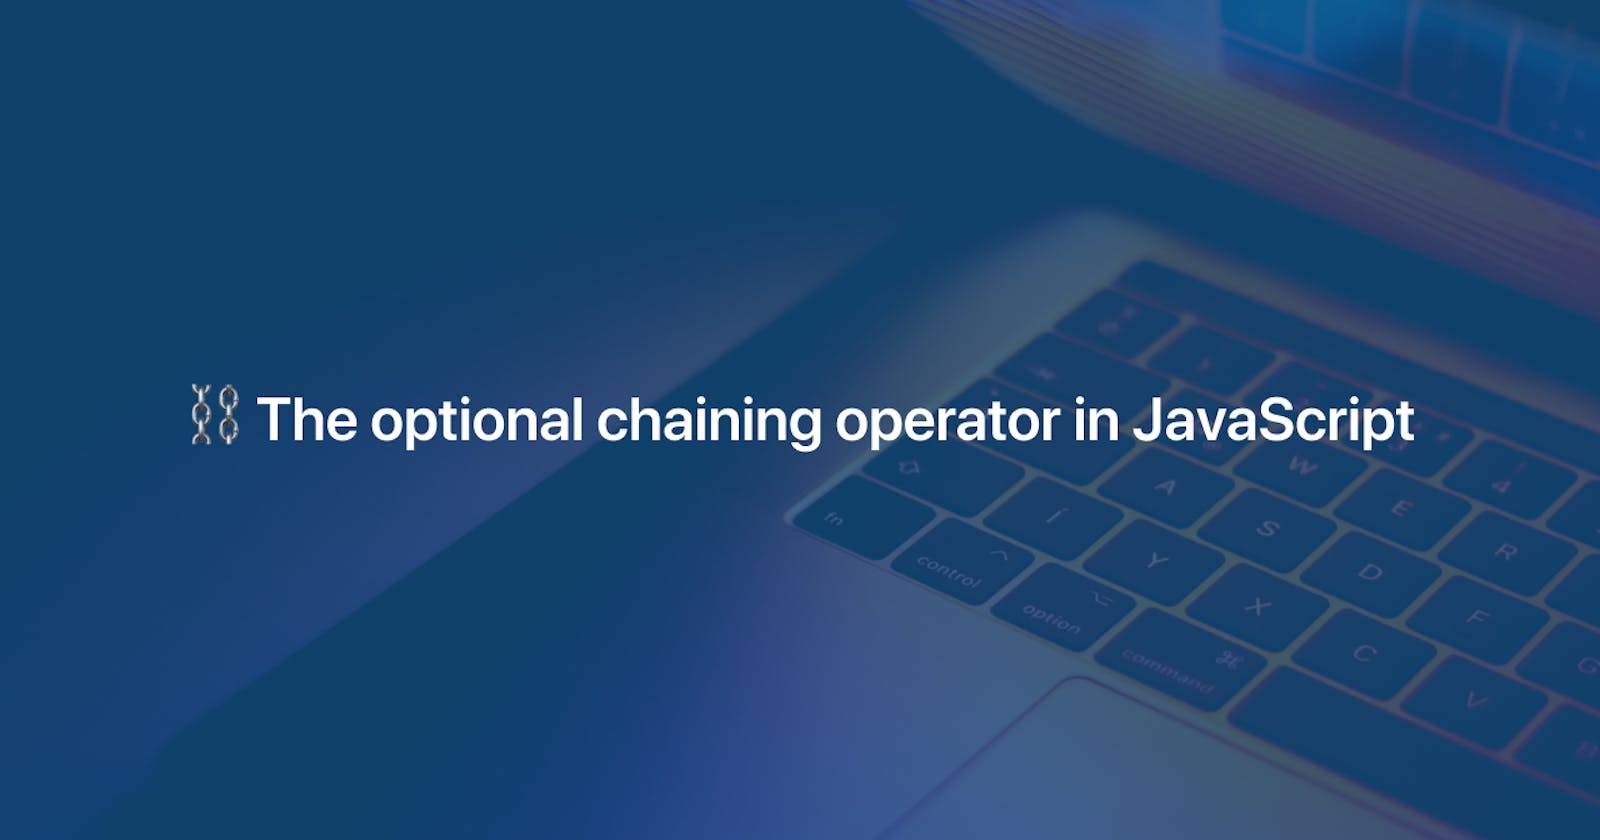 ⛓ The optional chaining operator in JavaScript